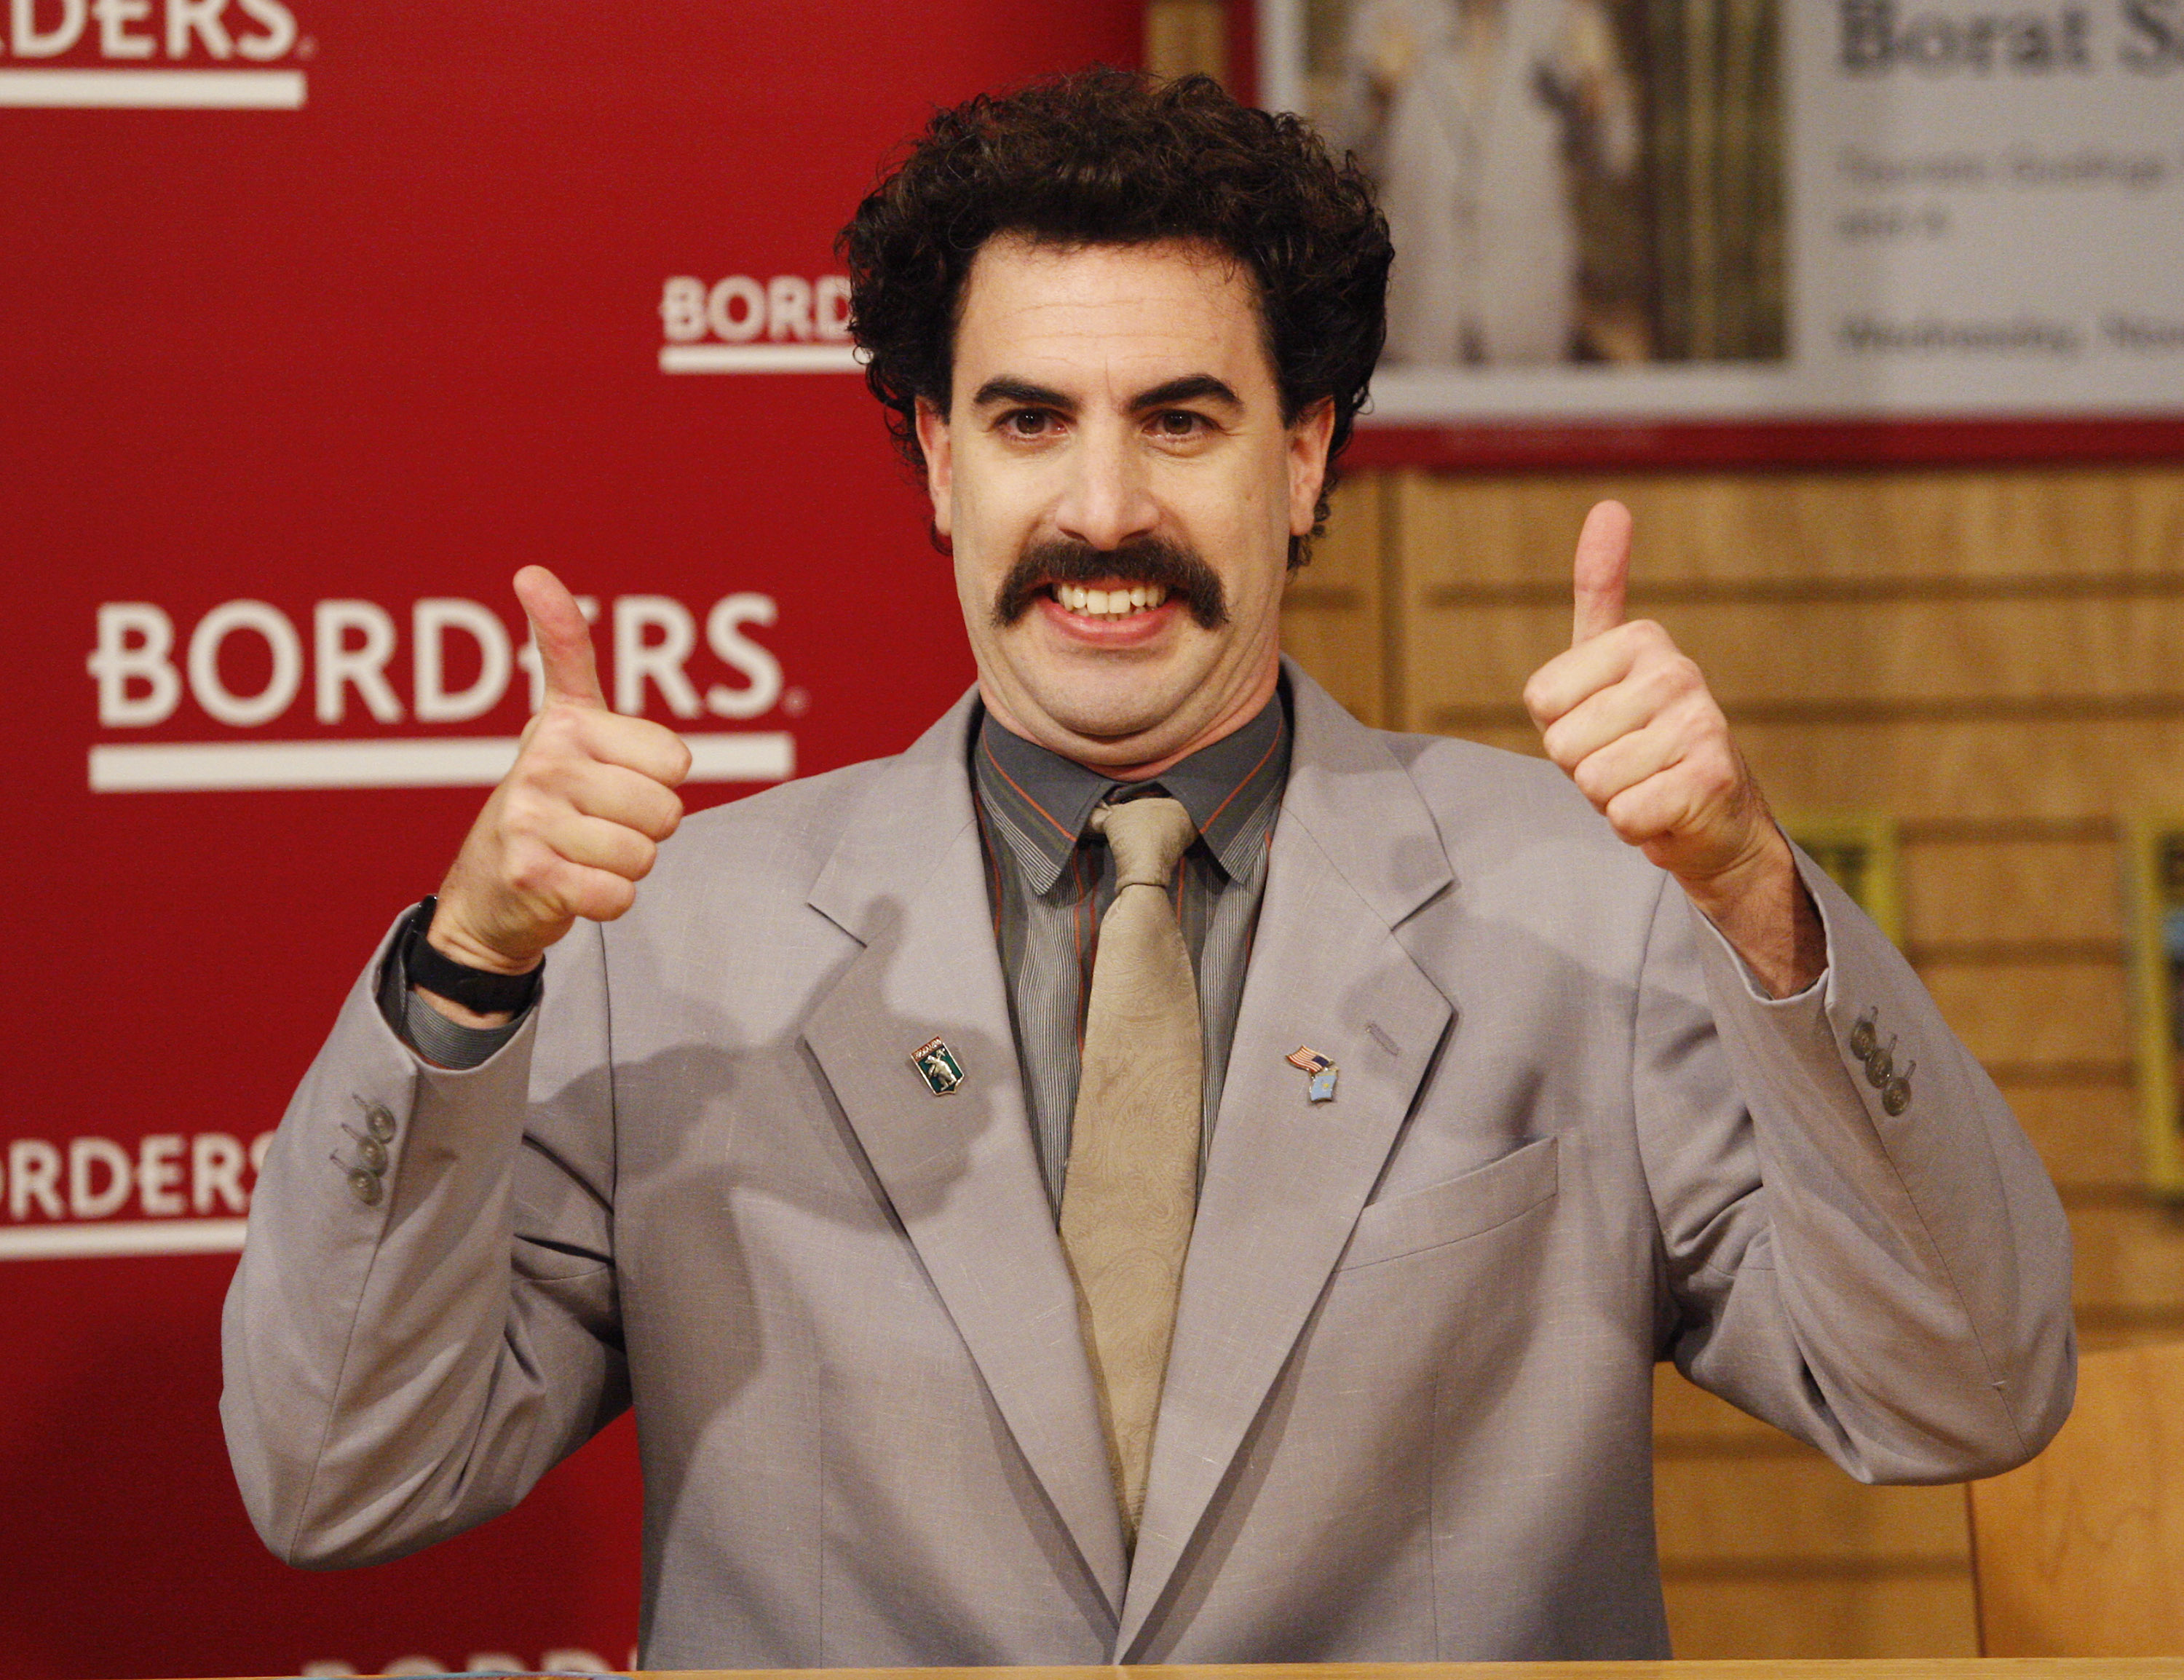 Borat Sagdiyev, played by actor Saha Baron Cohen, attends a signing for his new book "BORAT: Touristic Guidings to Minor Nation of U.S. and A. and Touristic Guidings to Glorious Nation of Kazakhstan"  on November 7, 2007 in Los Angeles. (Vince Bucci&mdash;Getty Images)